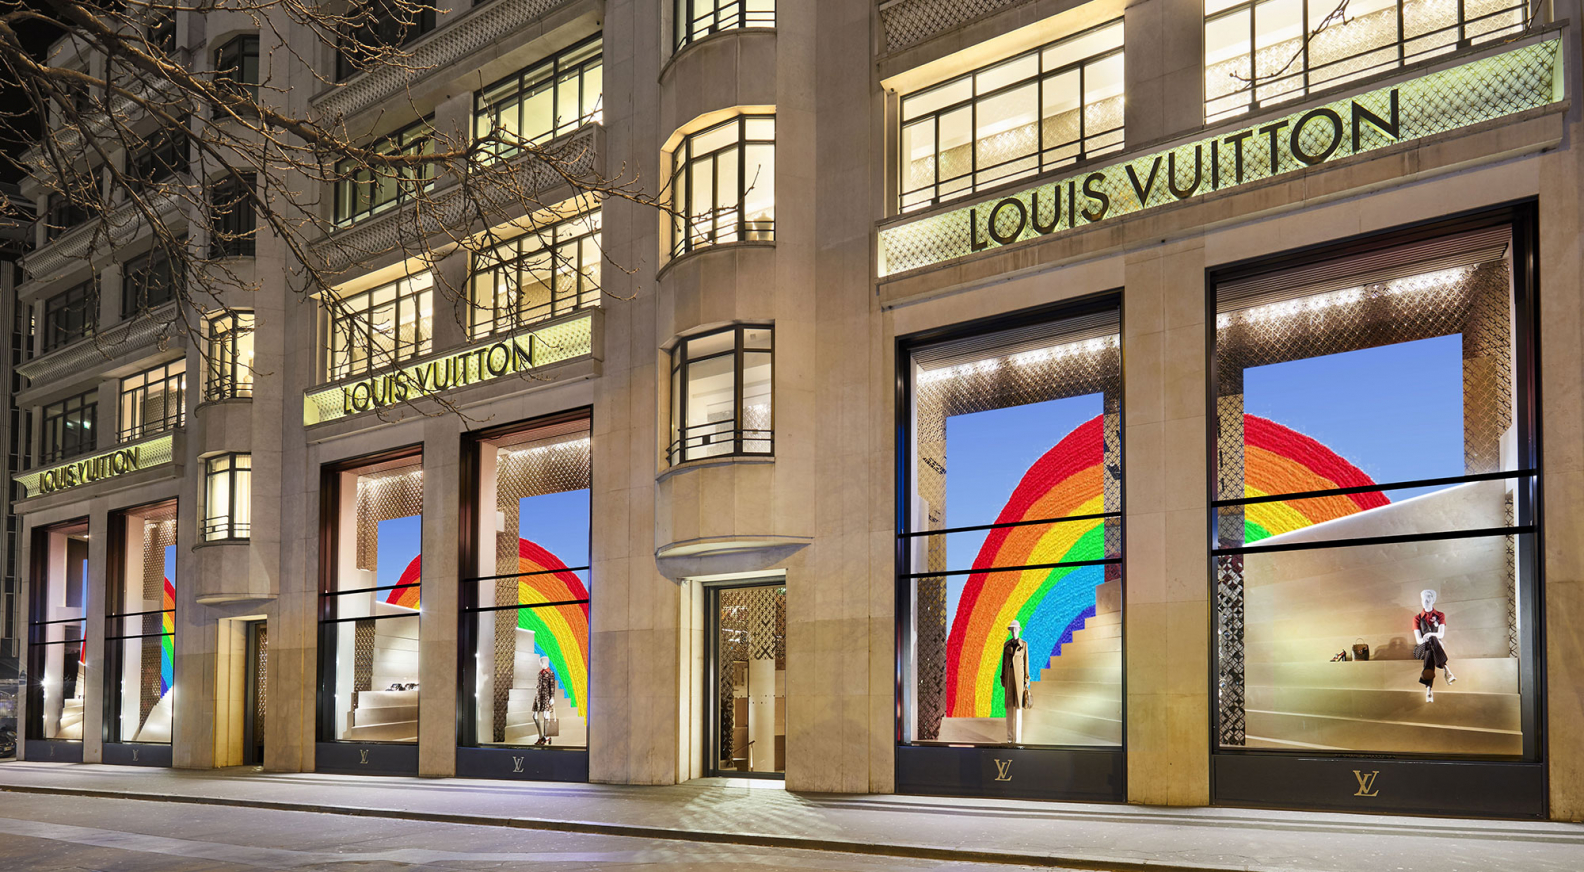 Case study on LVMH's Rebound And E-Commerce Drive Growth